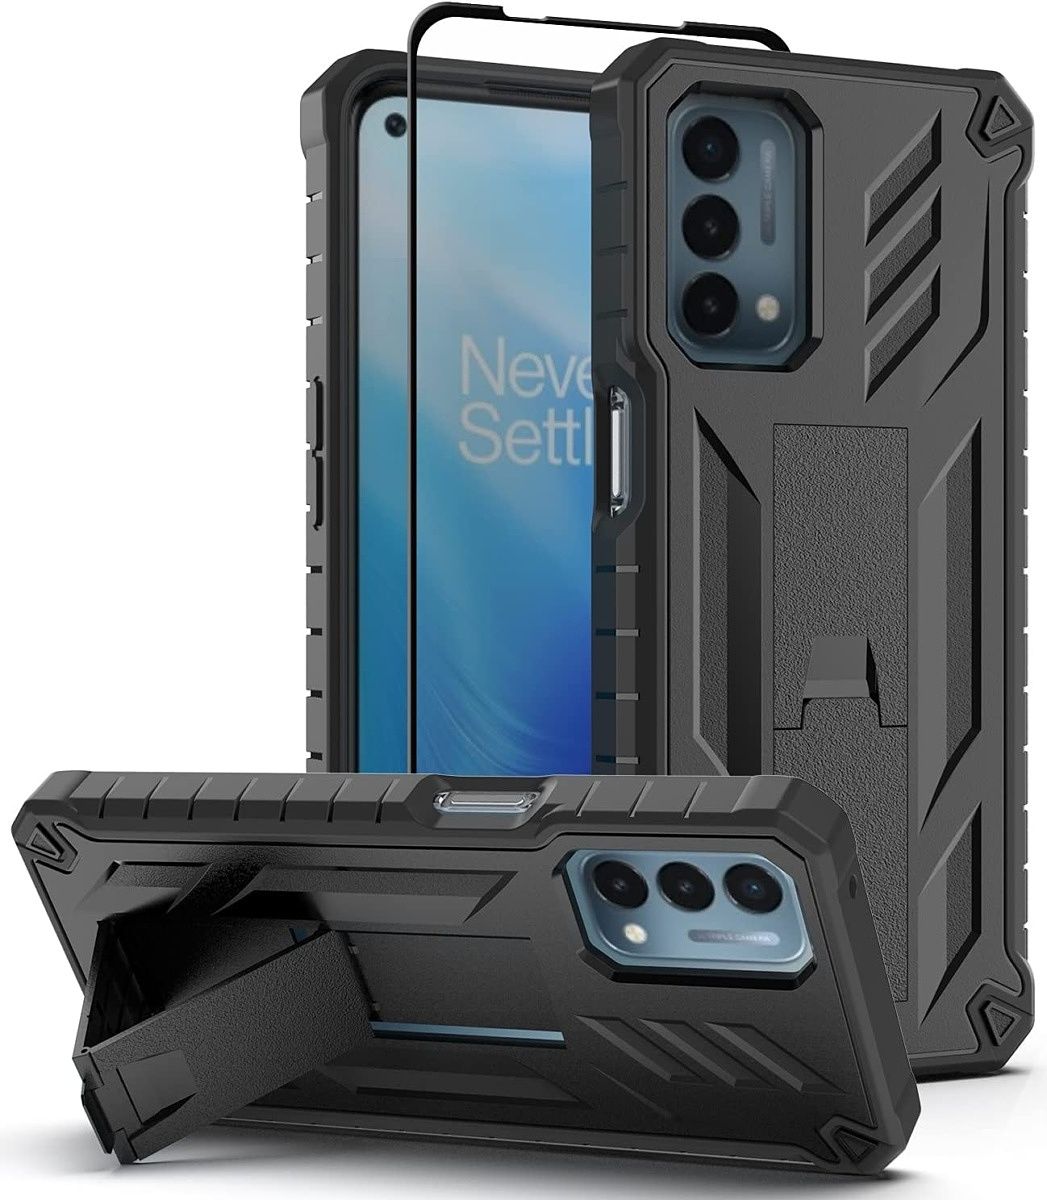 The Aoways ShockProof Case is another good budget option for your phone. It doesn't cost a lot but provides military-grade protection. It carries a two-layer design, like many sturdy cases, and comes with a built-in kickstand. The company is also bundling a tempered glass screen protector that you can use to safeguard the display.